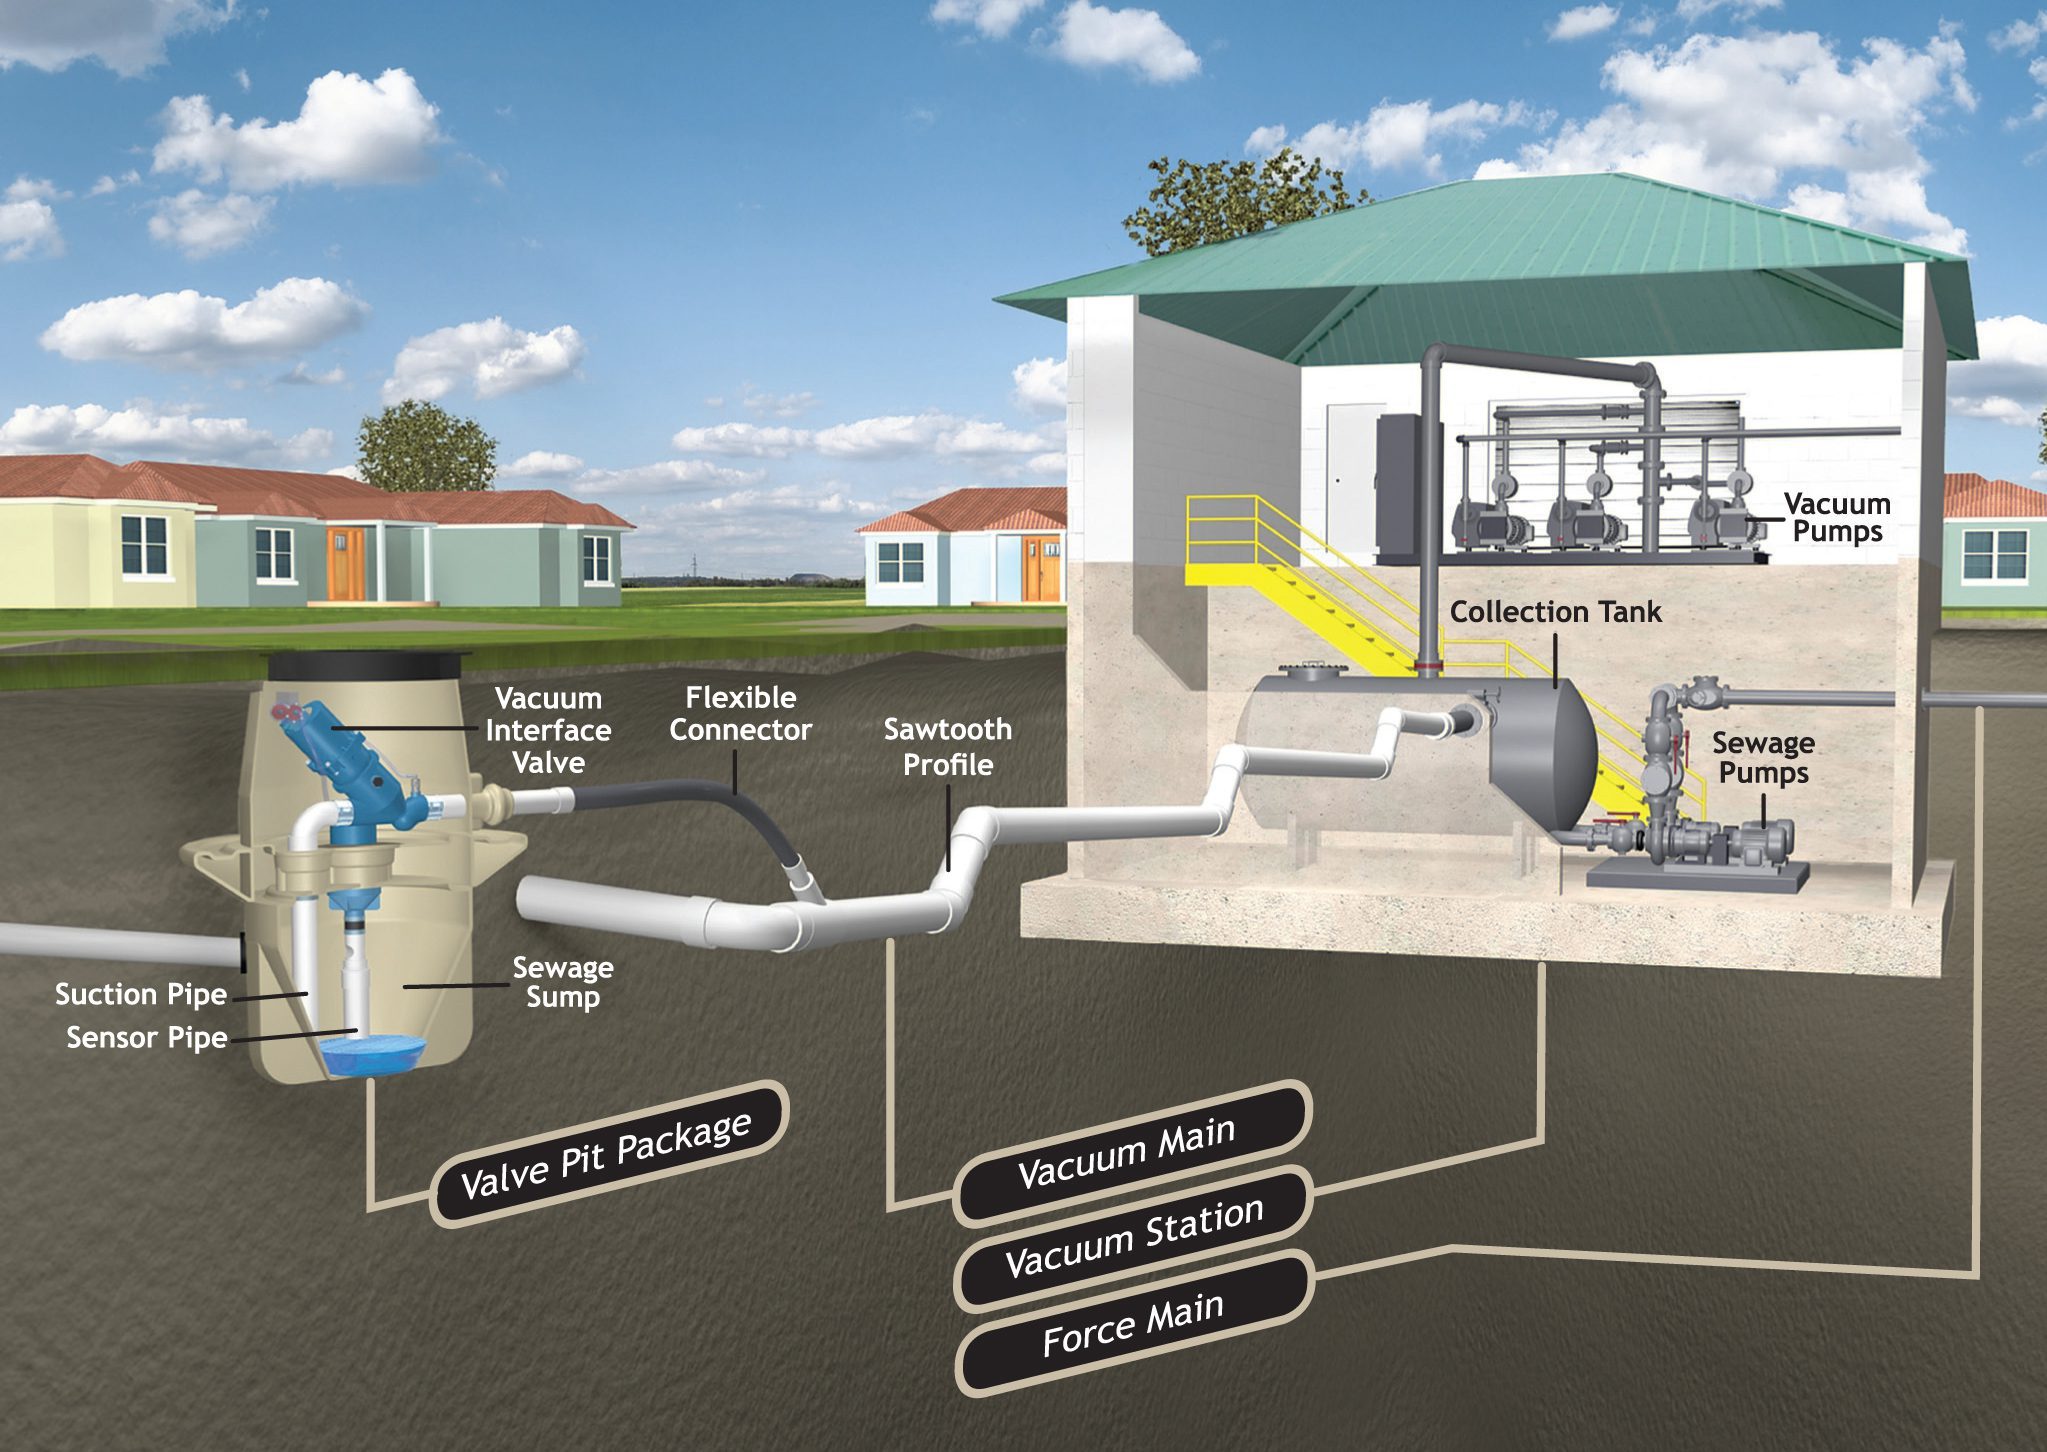 For more information about vacuum sewer technology click this image for a video and visit www.water.bilfinger.com.